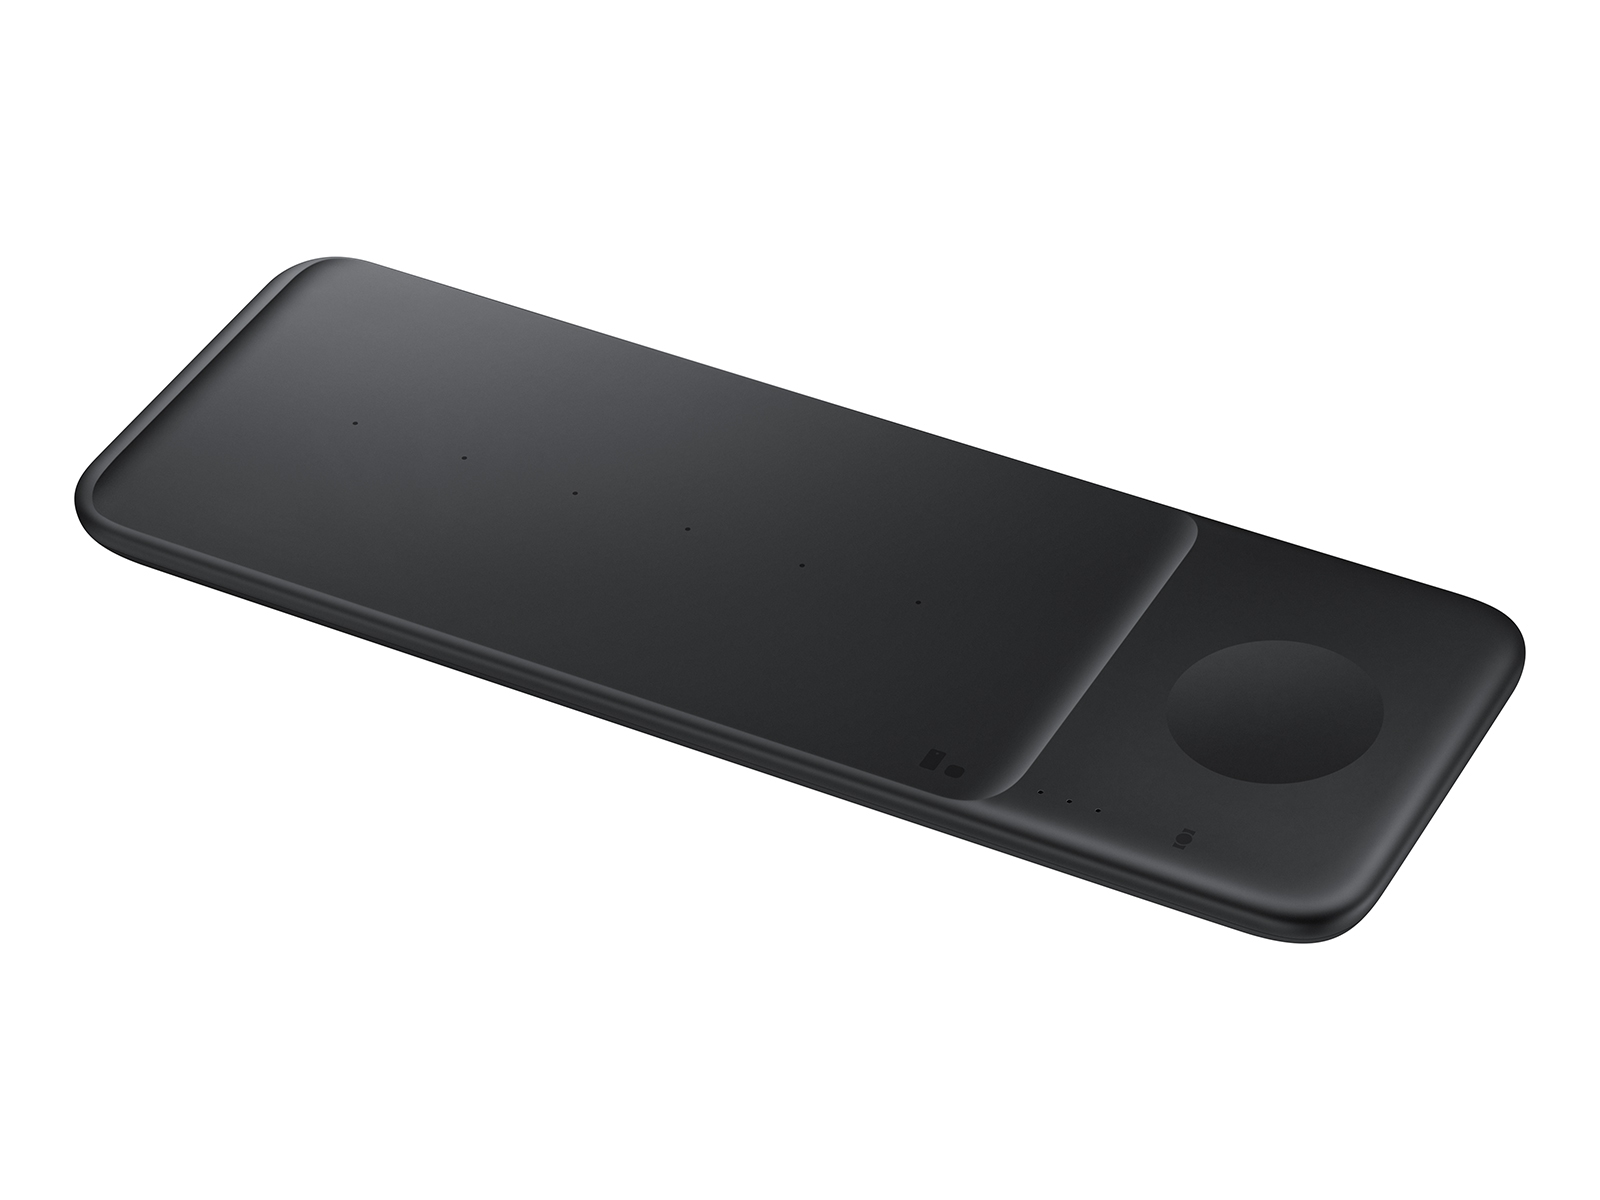 Wireless Charger Trio, Black Mobile Accessories - EP-P6300TBEGUS 